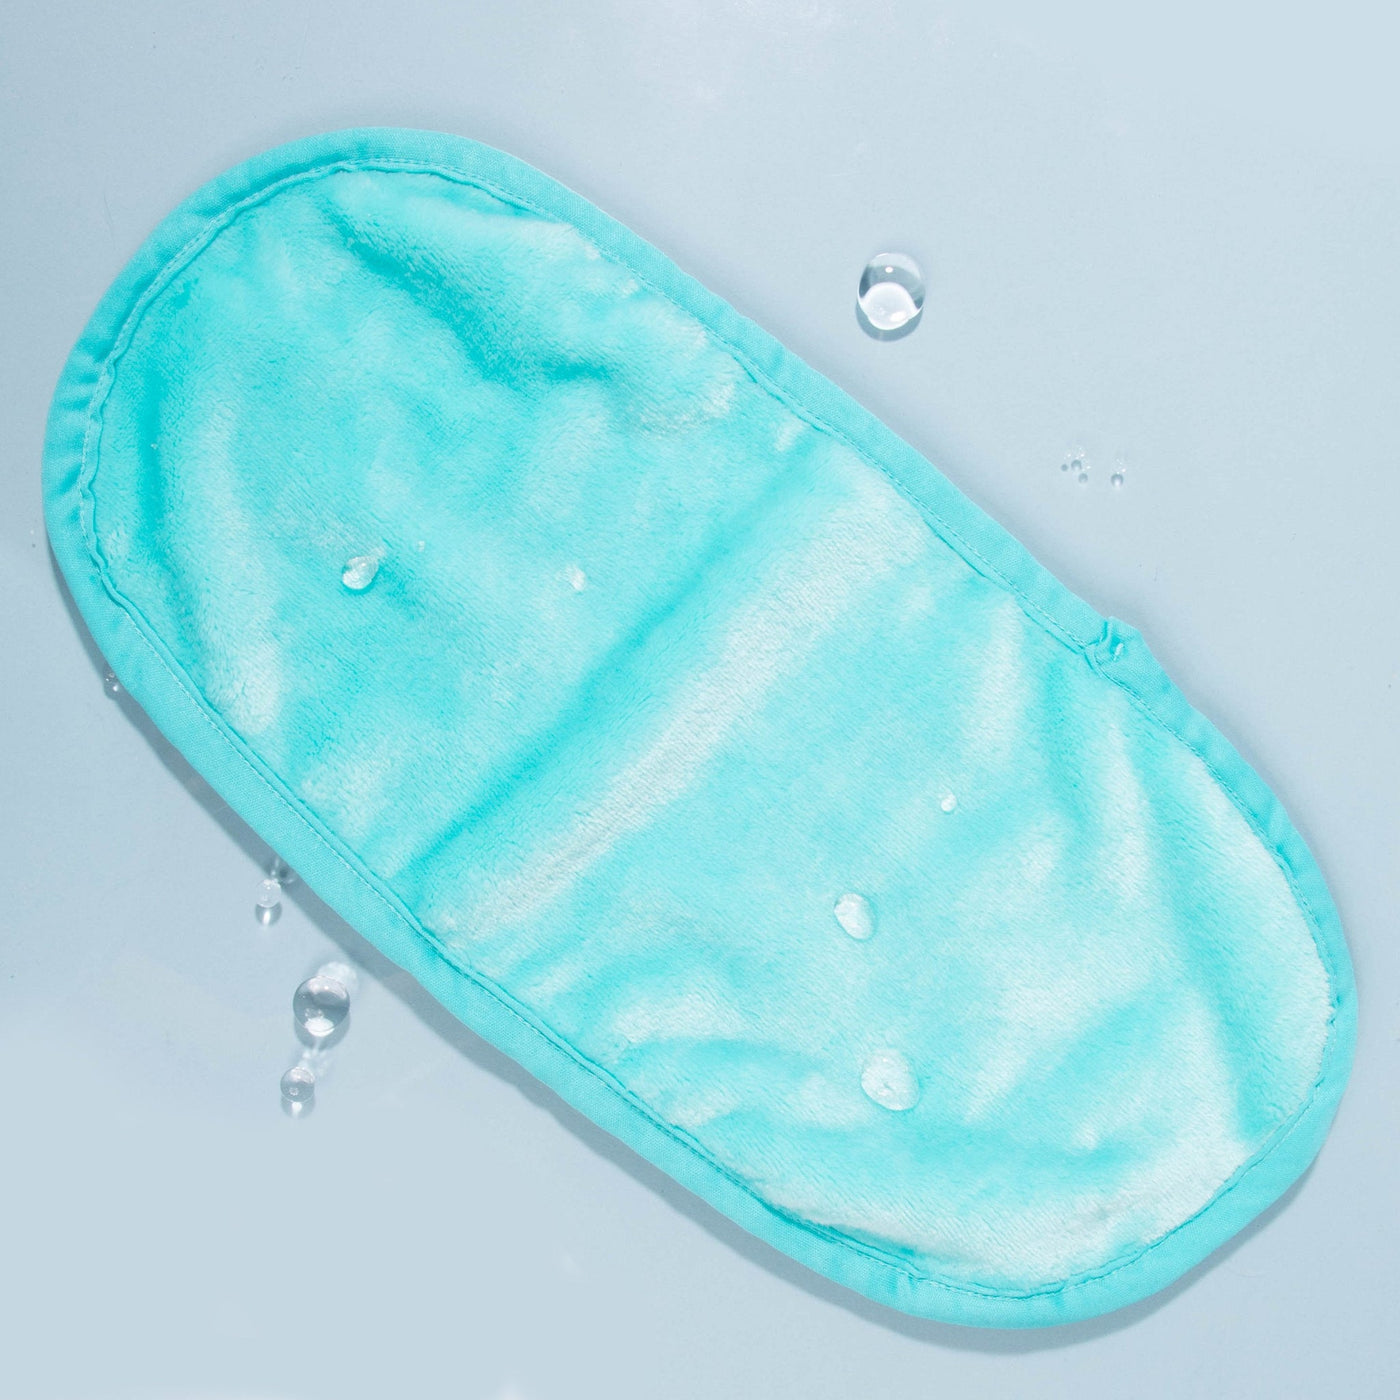 THE ORIGINAL MAKEUP ERASER (Fresh Turquoise) - Youngblood Mineral Cosmetics